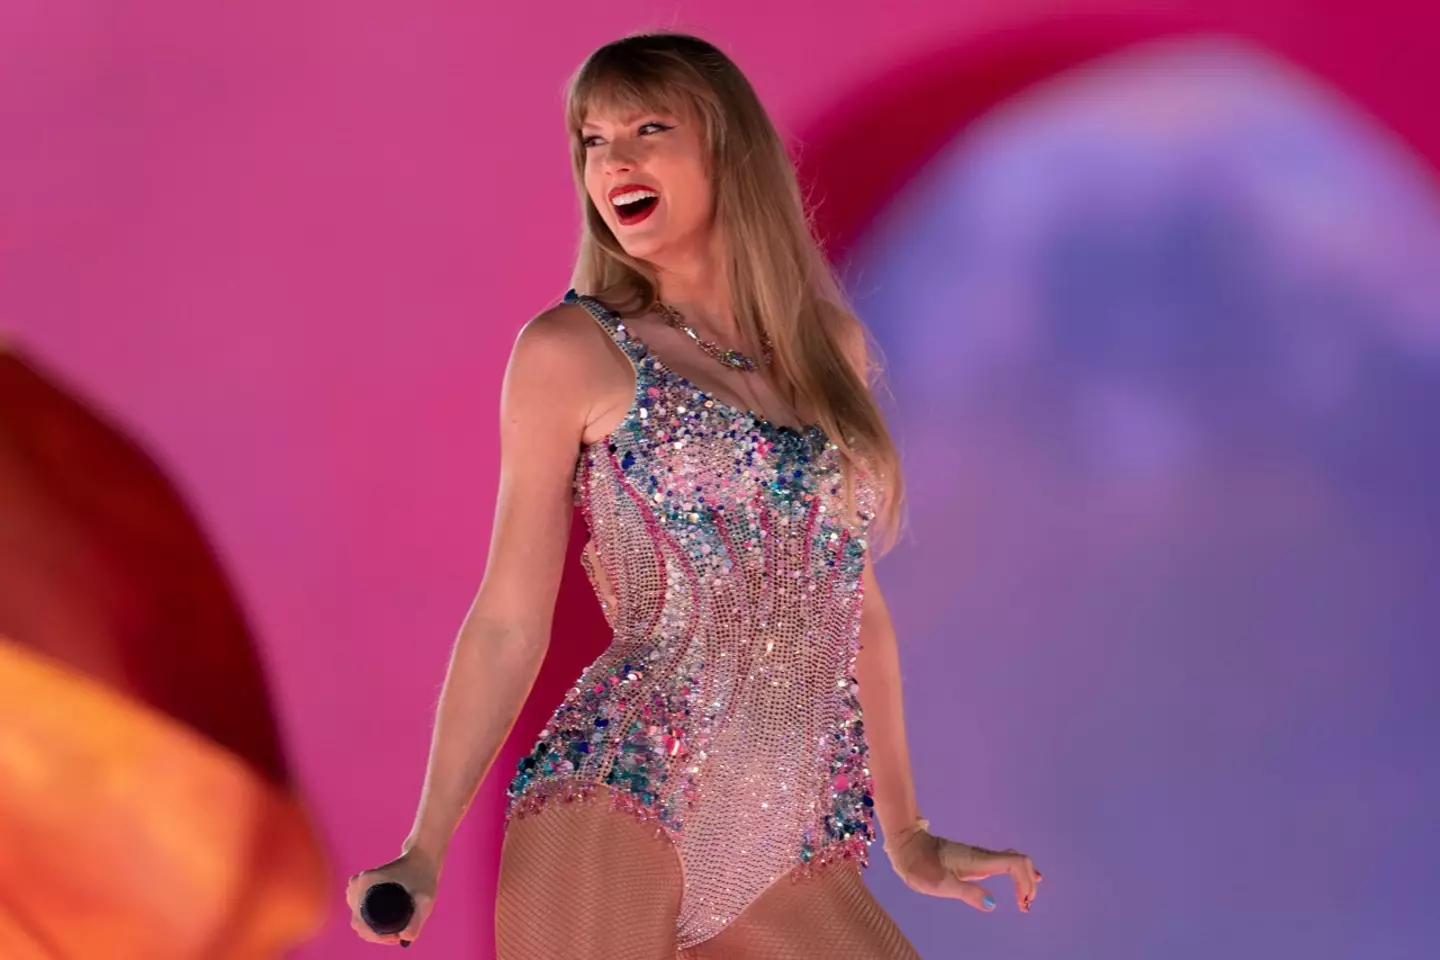 Taylor Swift is now the second richest self-made woman in music, comfortably beating Madonna and Beyonce.